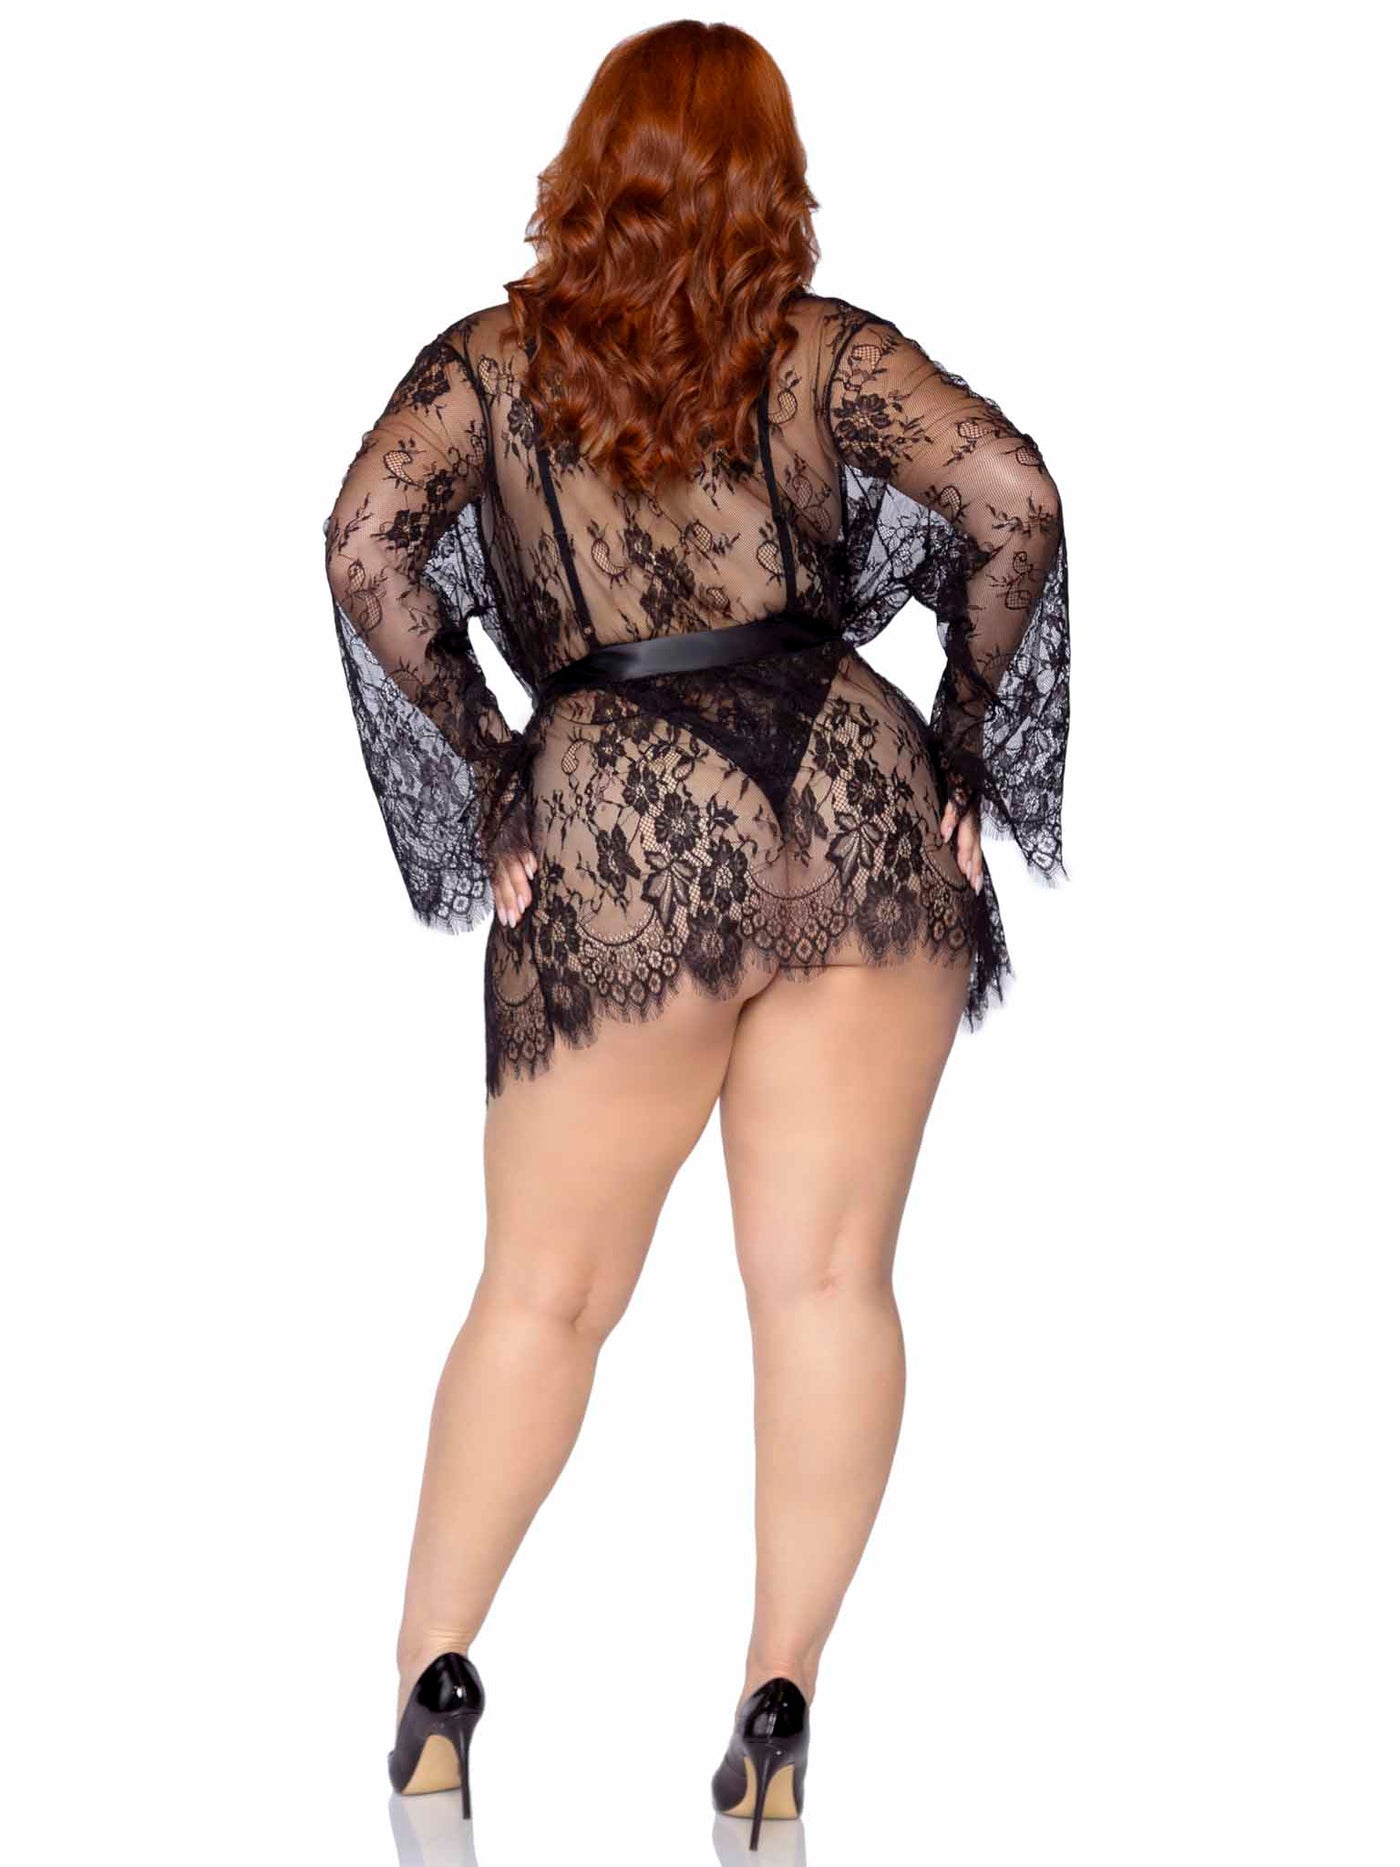 3-piece Floral Lace Teddy With Adjustable Straps And Cheeky Thong Back